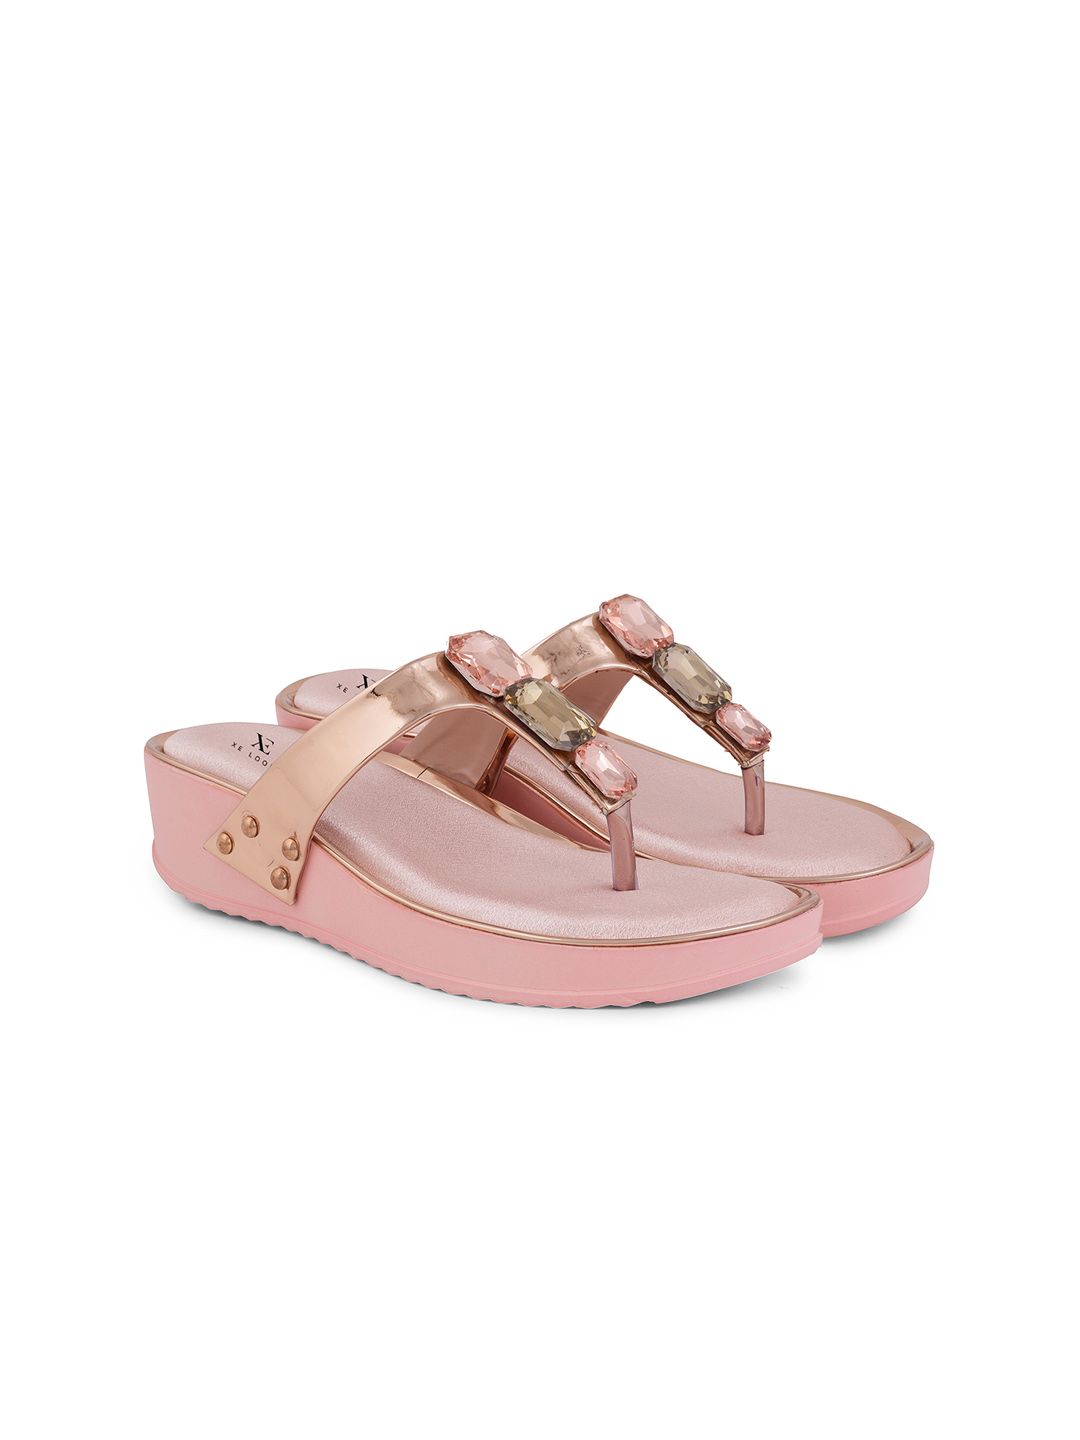 XE LOOKS Peach-Coloured Embellished Wedge Sandals Price in India